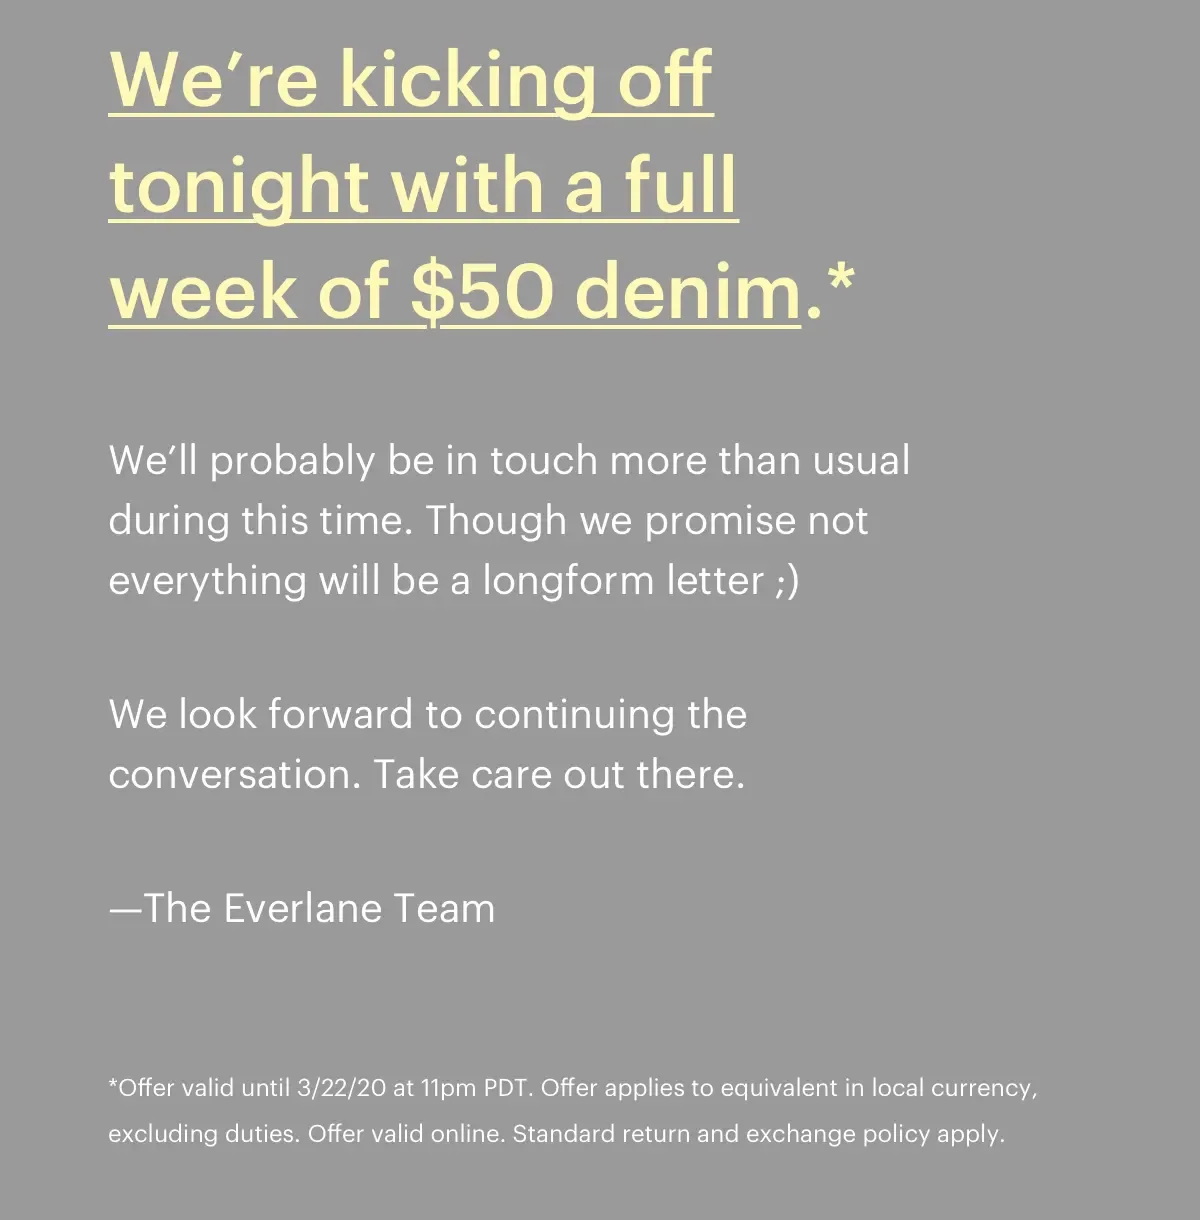 We look forward to continuing the conversation. Take care out there. - The Everlane Team